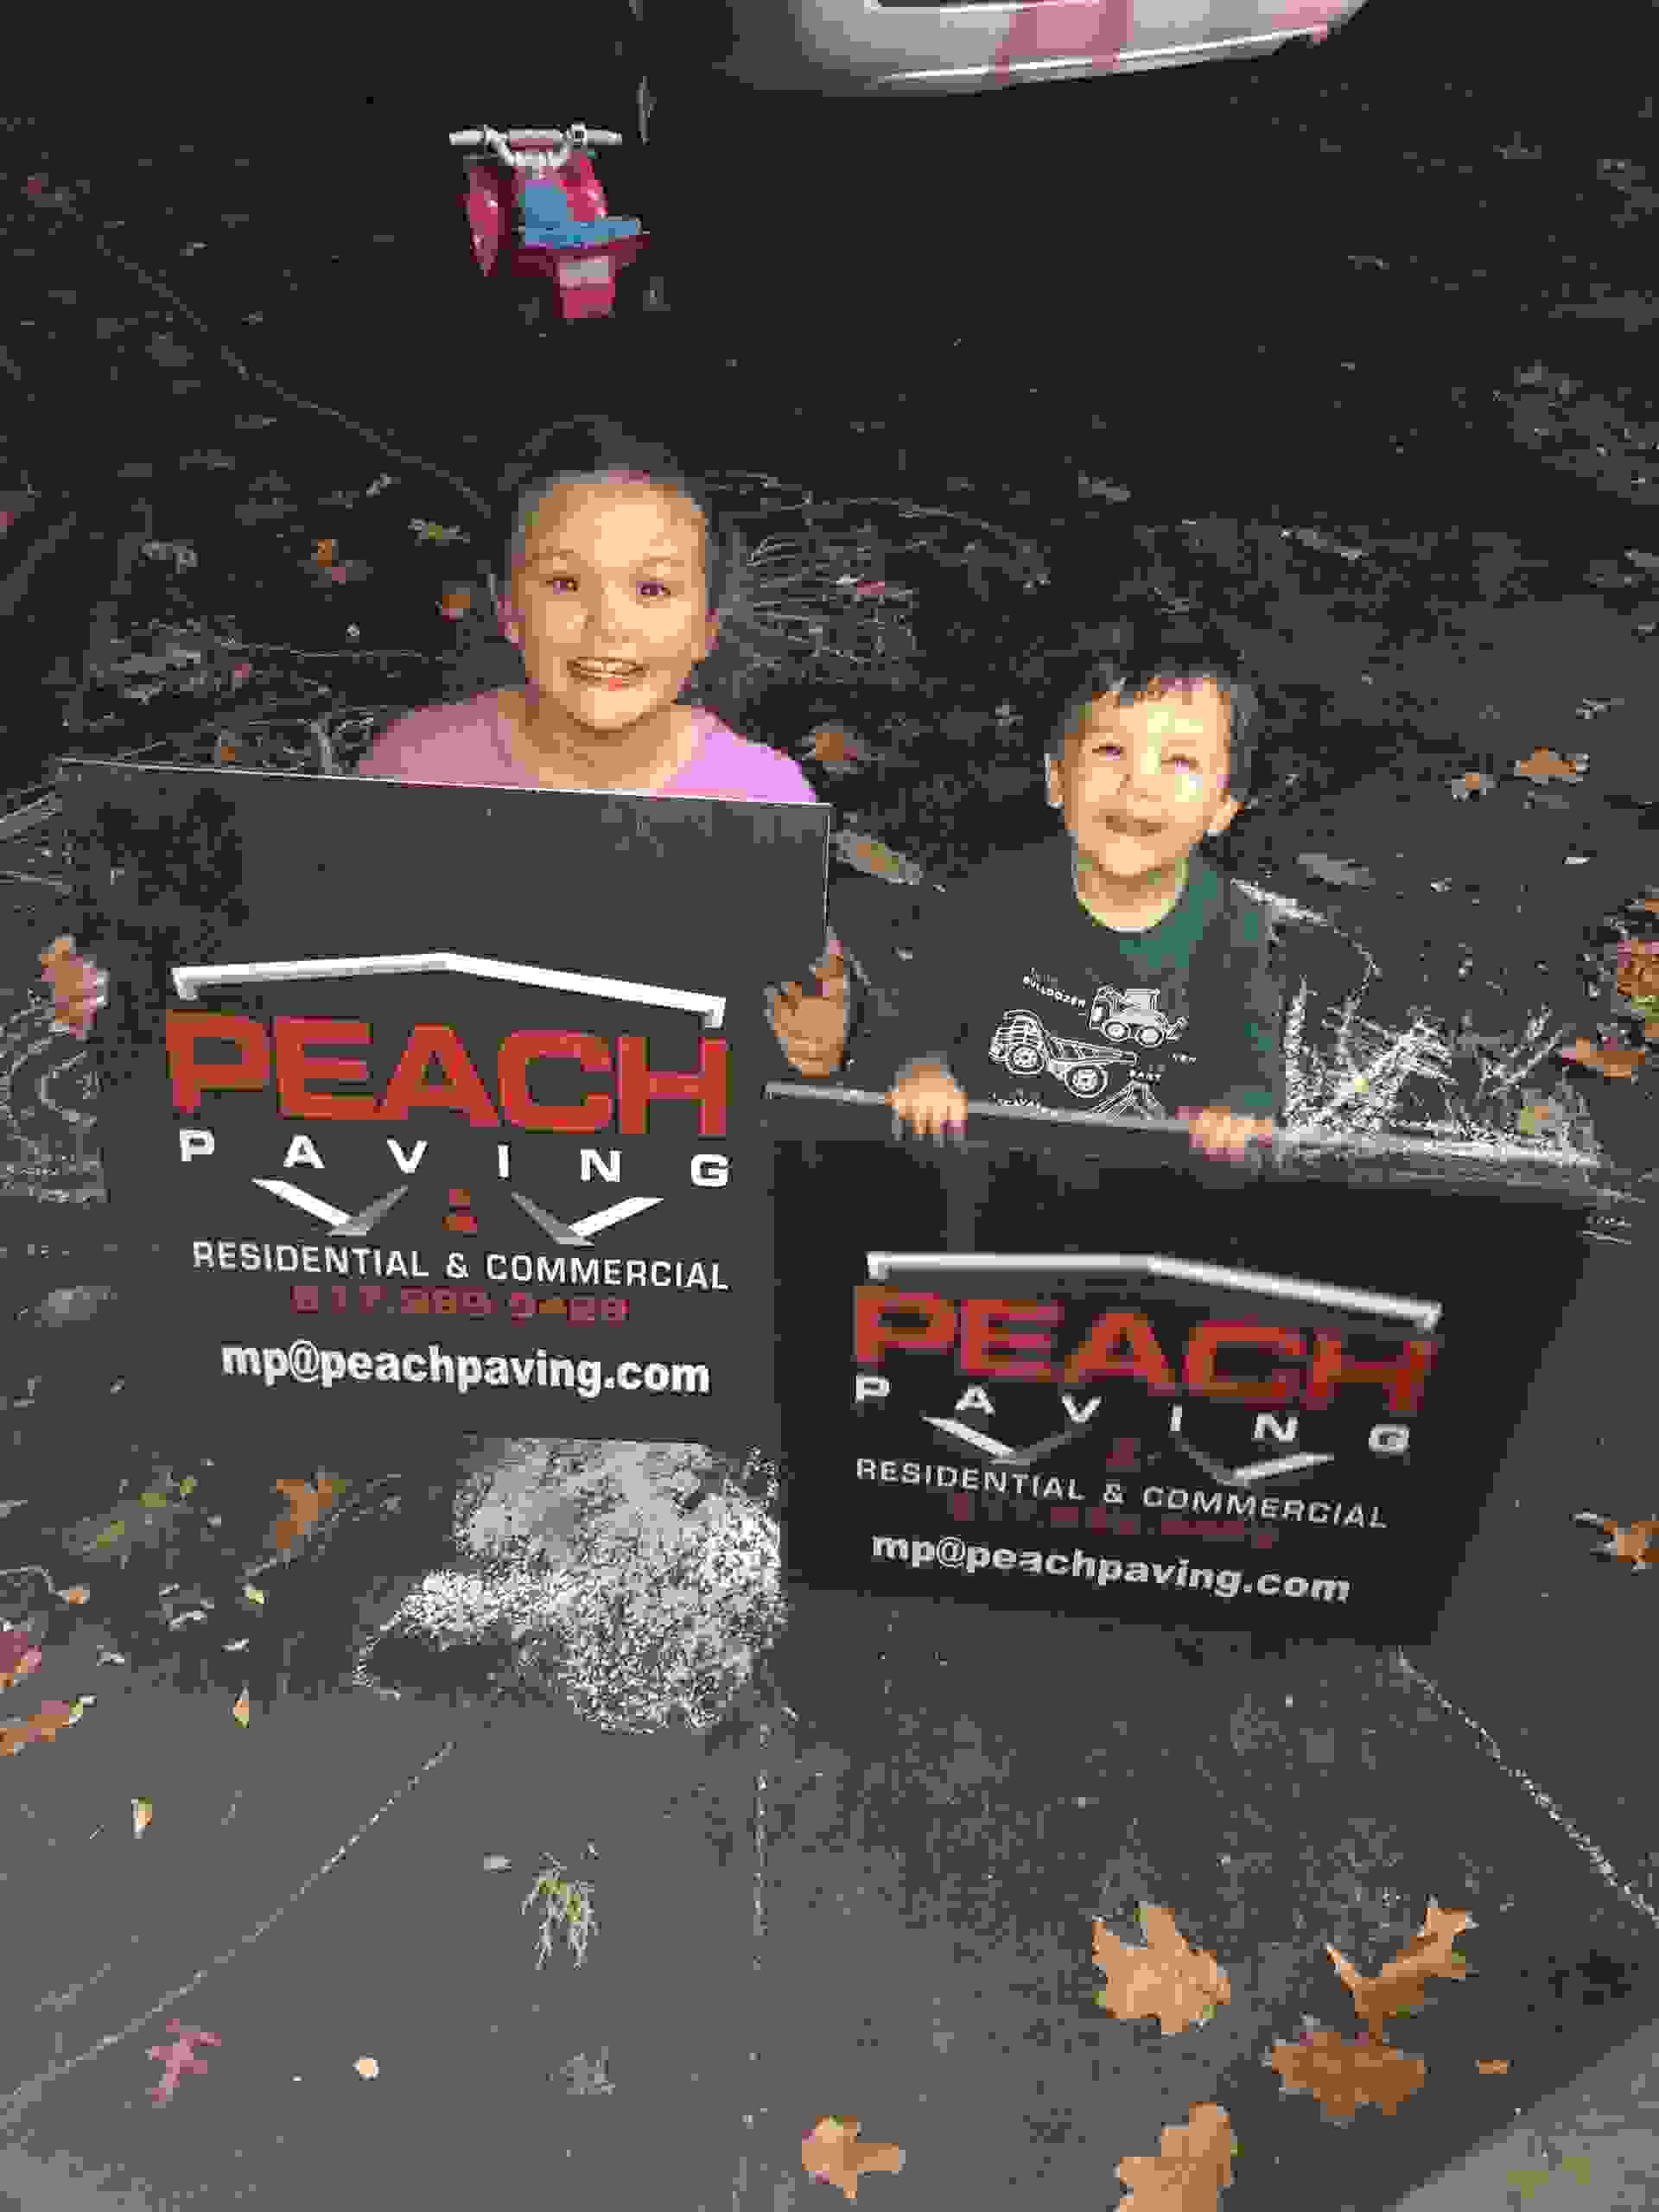 Ella & Marky Peach the future managers at Peach Paving 